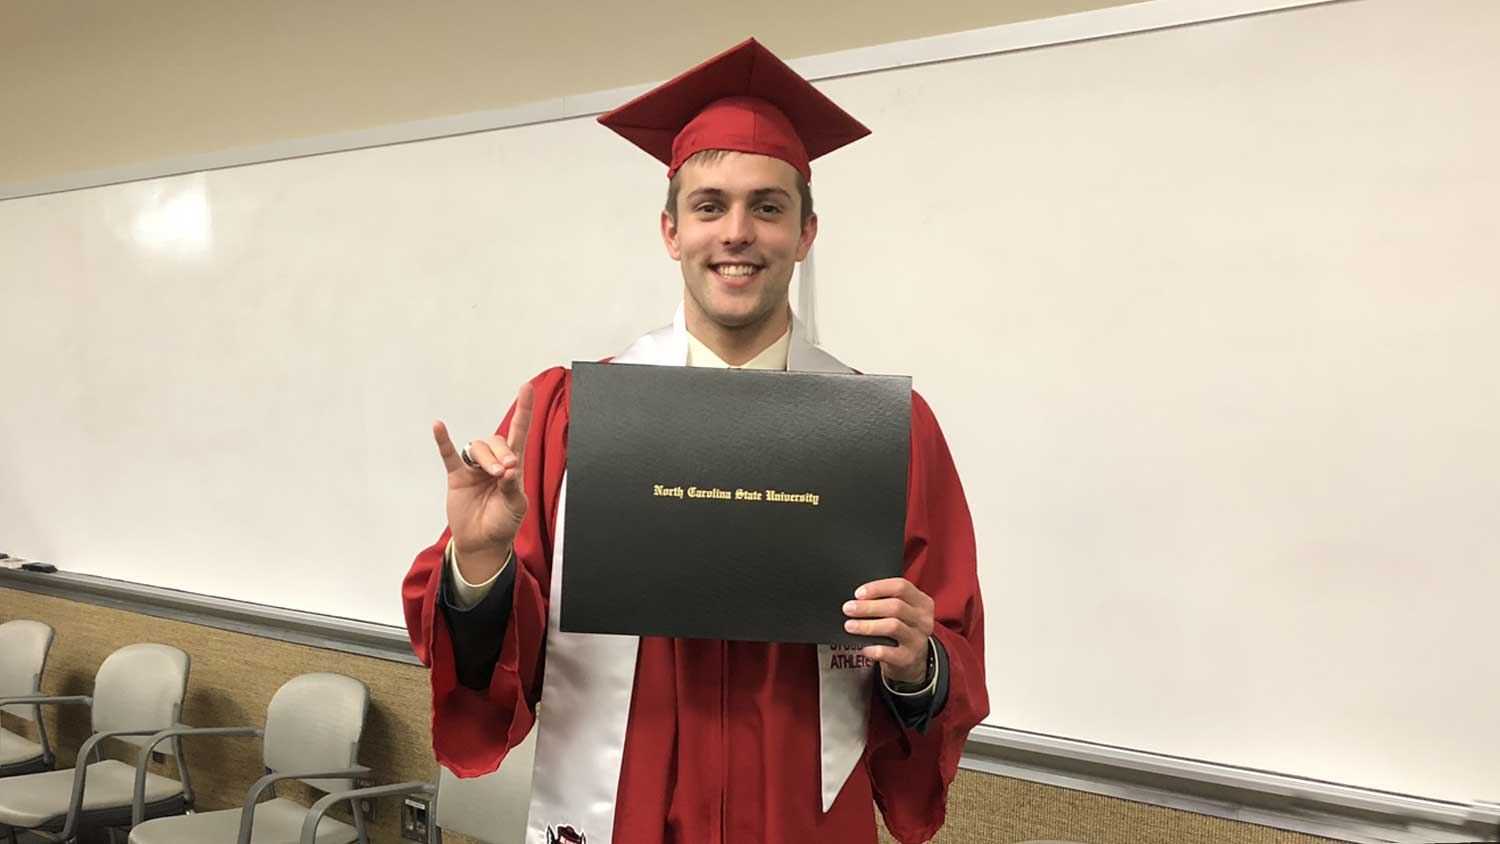 Ryan Held holding diploma after graduation ceremony